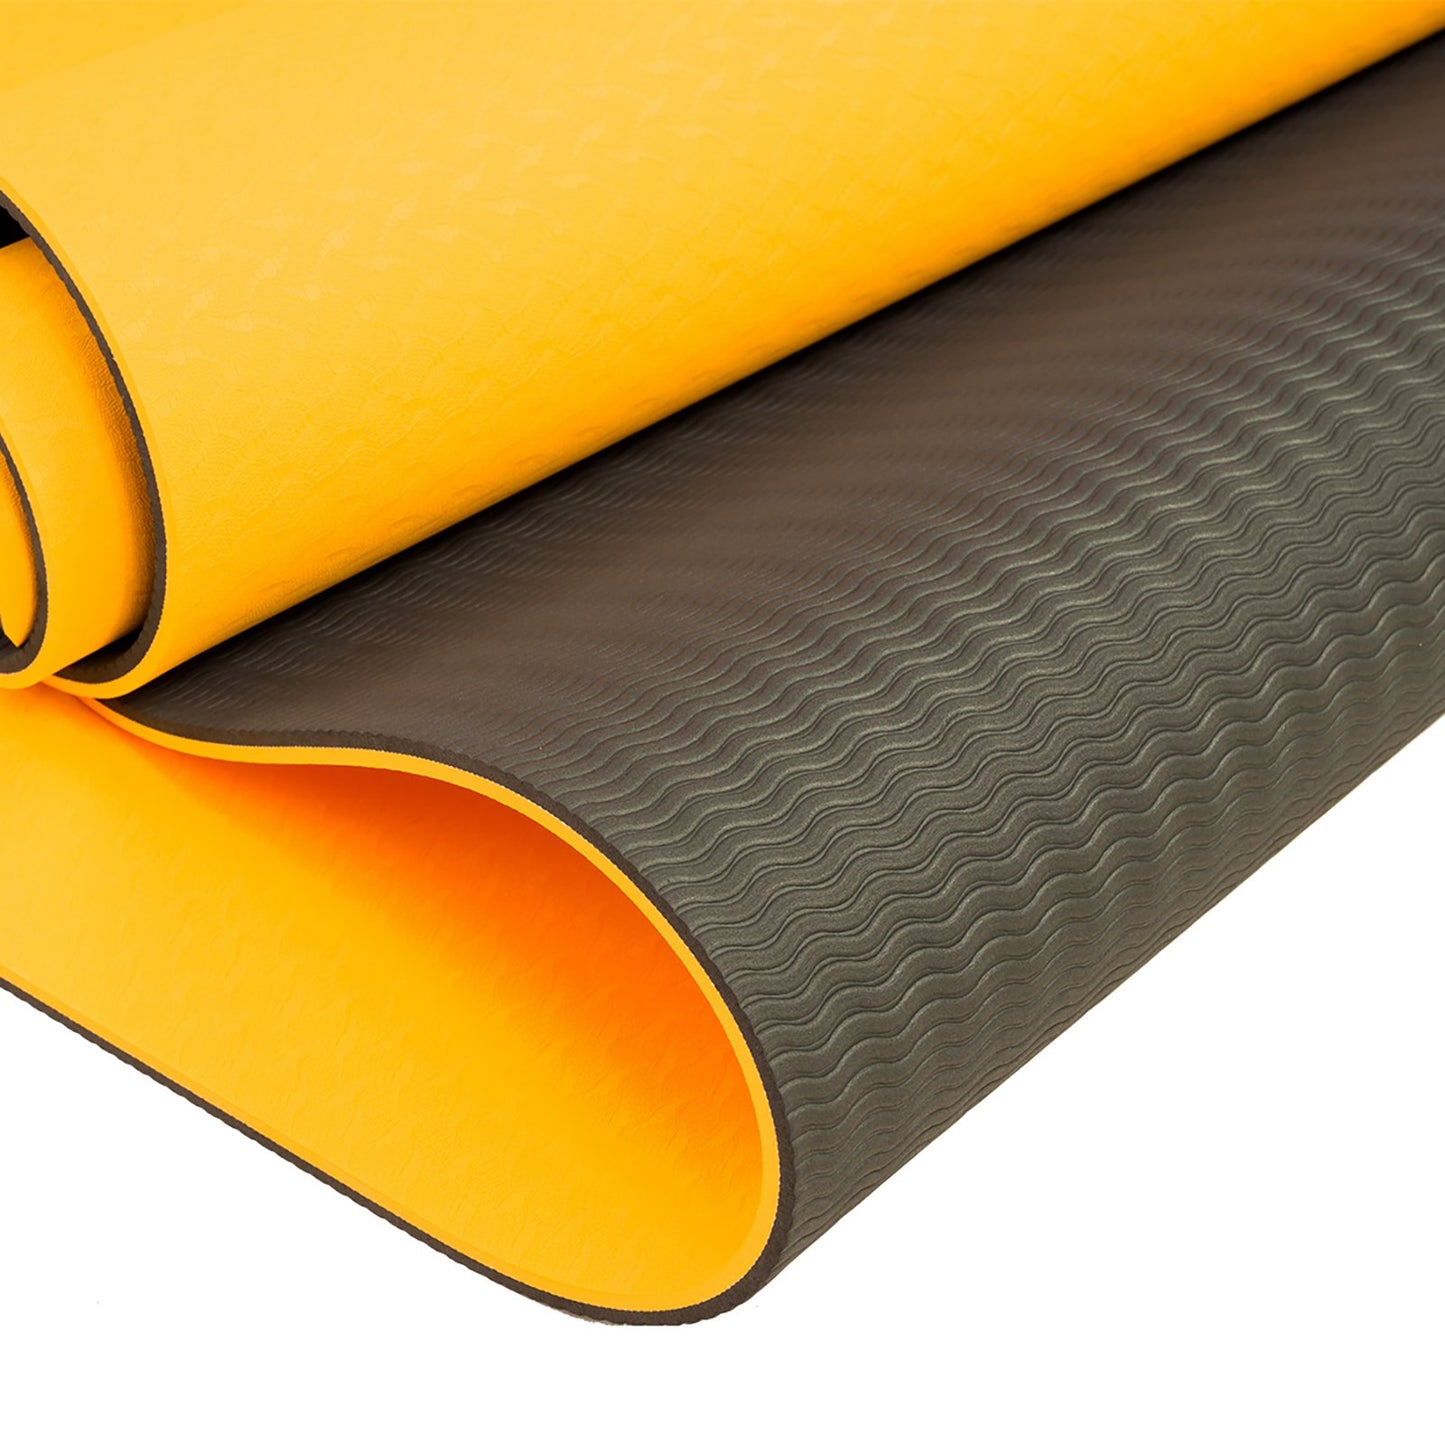 Powertrain Eco-Friendly Dual Layer 8mm Yoga Mat | Orange | Non-Slip Surface and Carry Strap for Ultimate Comfort and Portability